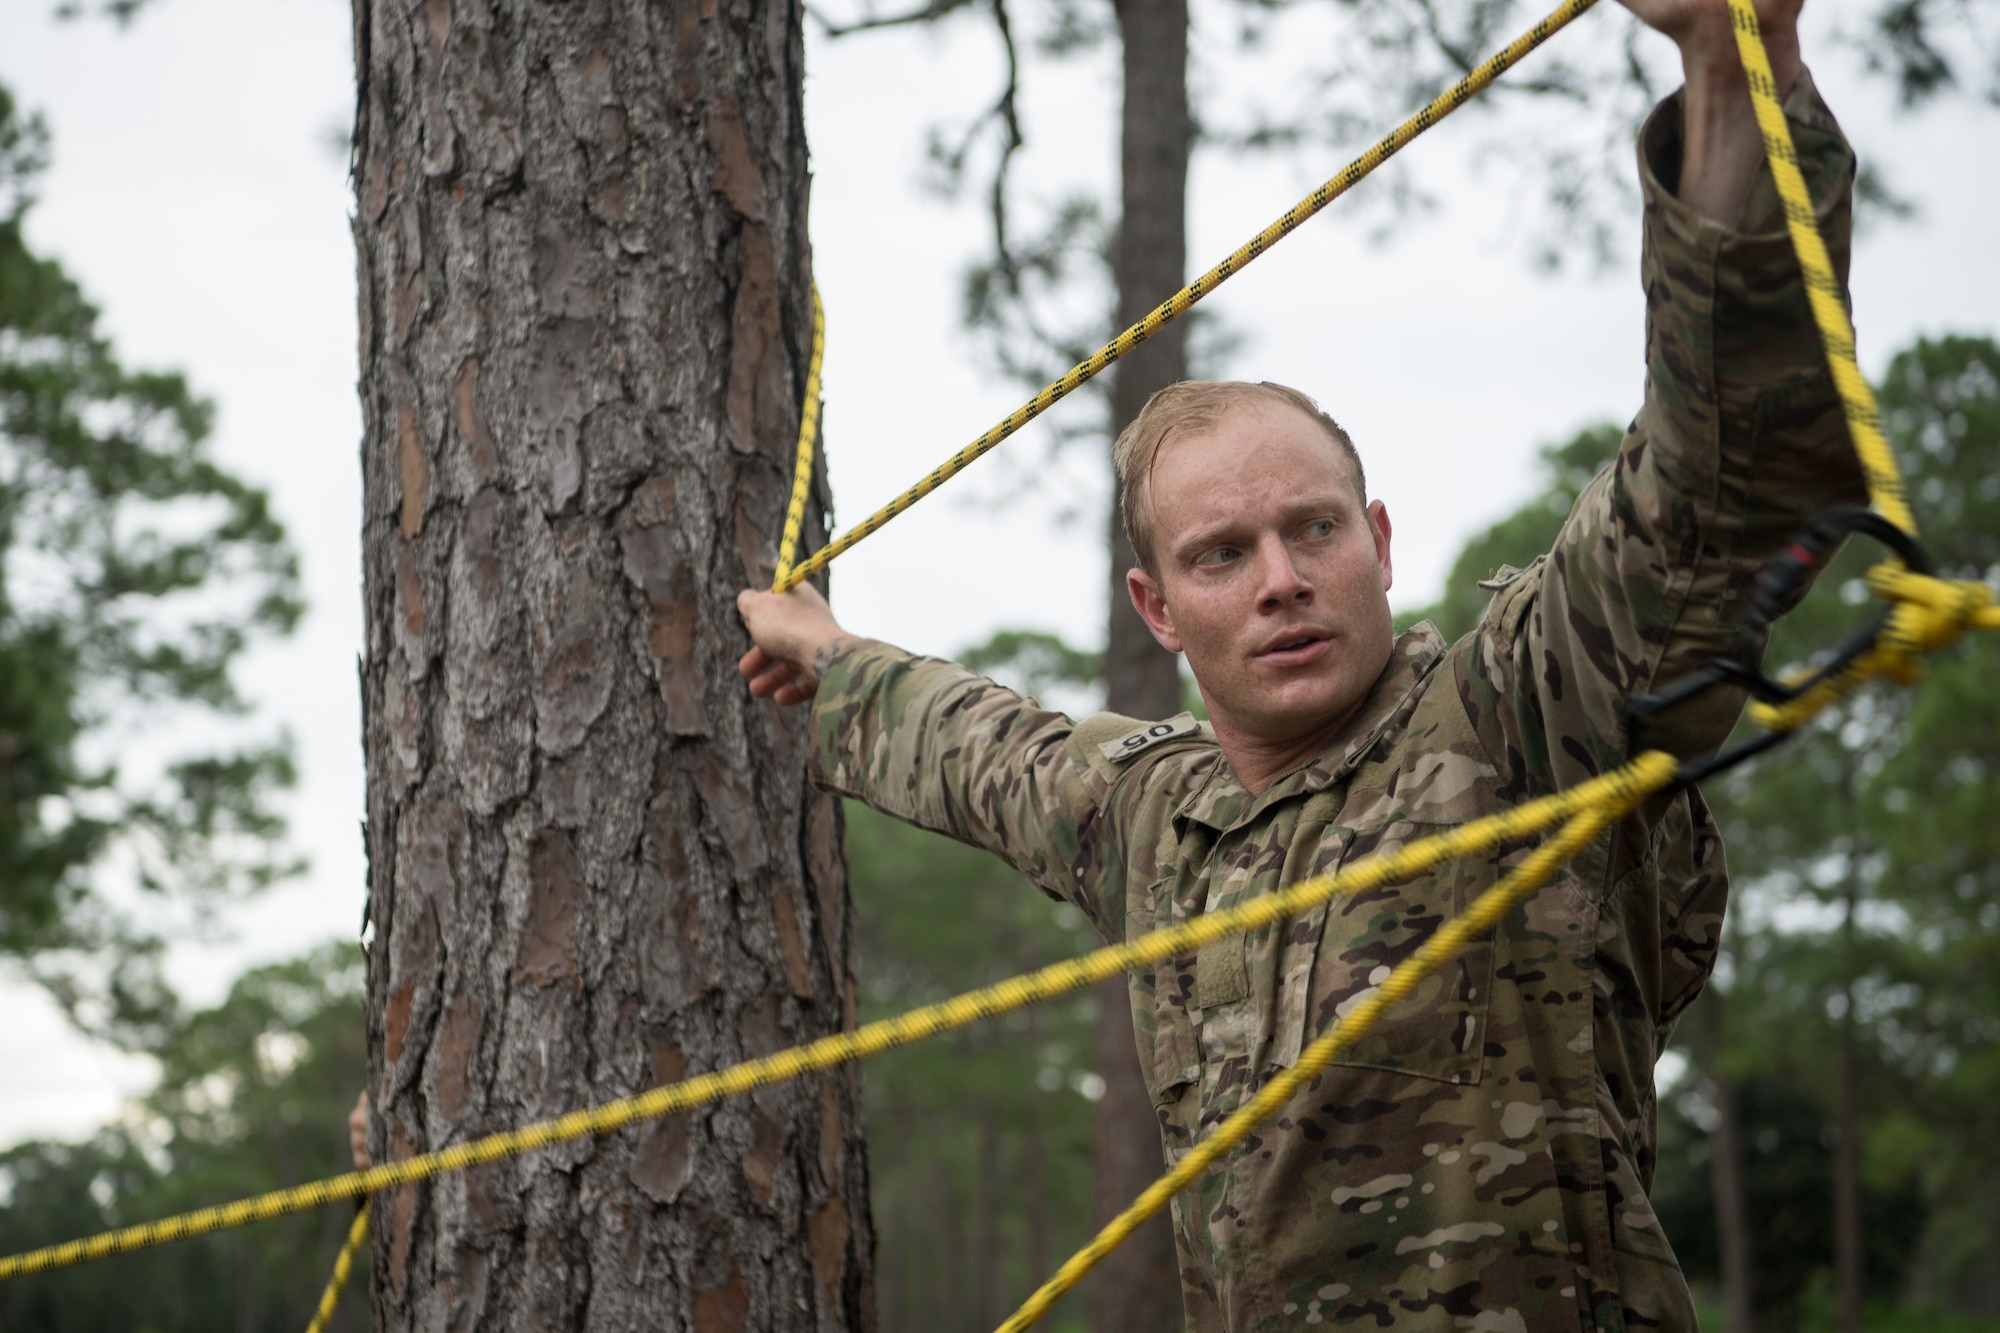 A Special Tactics tactical control air party candidate holds up a yellow taught rope to a thick tree as the rope crisscrosses in front of him.